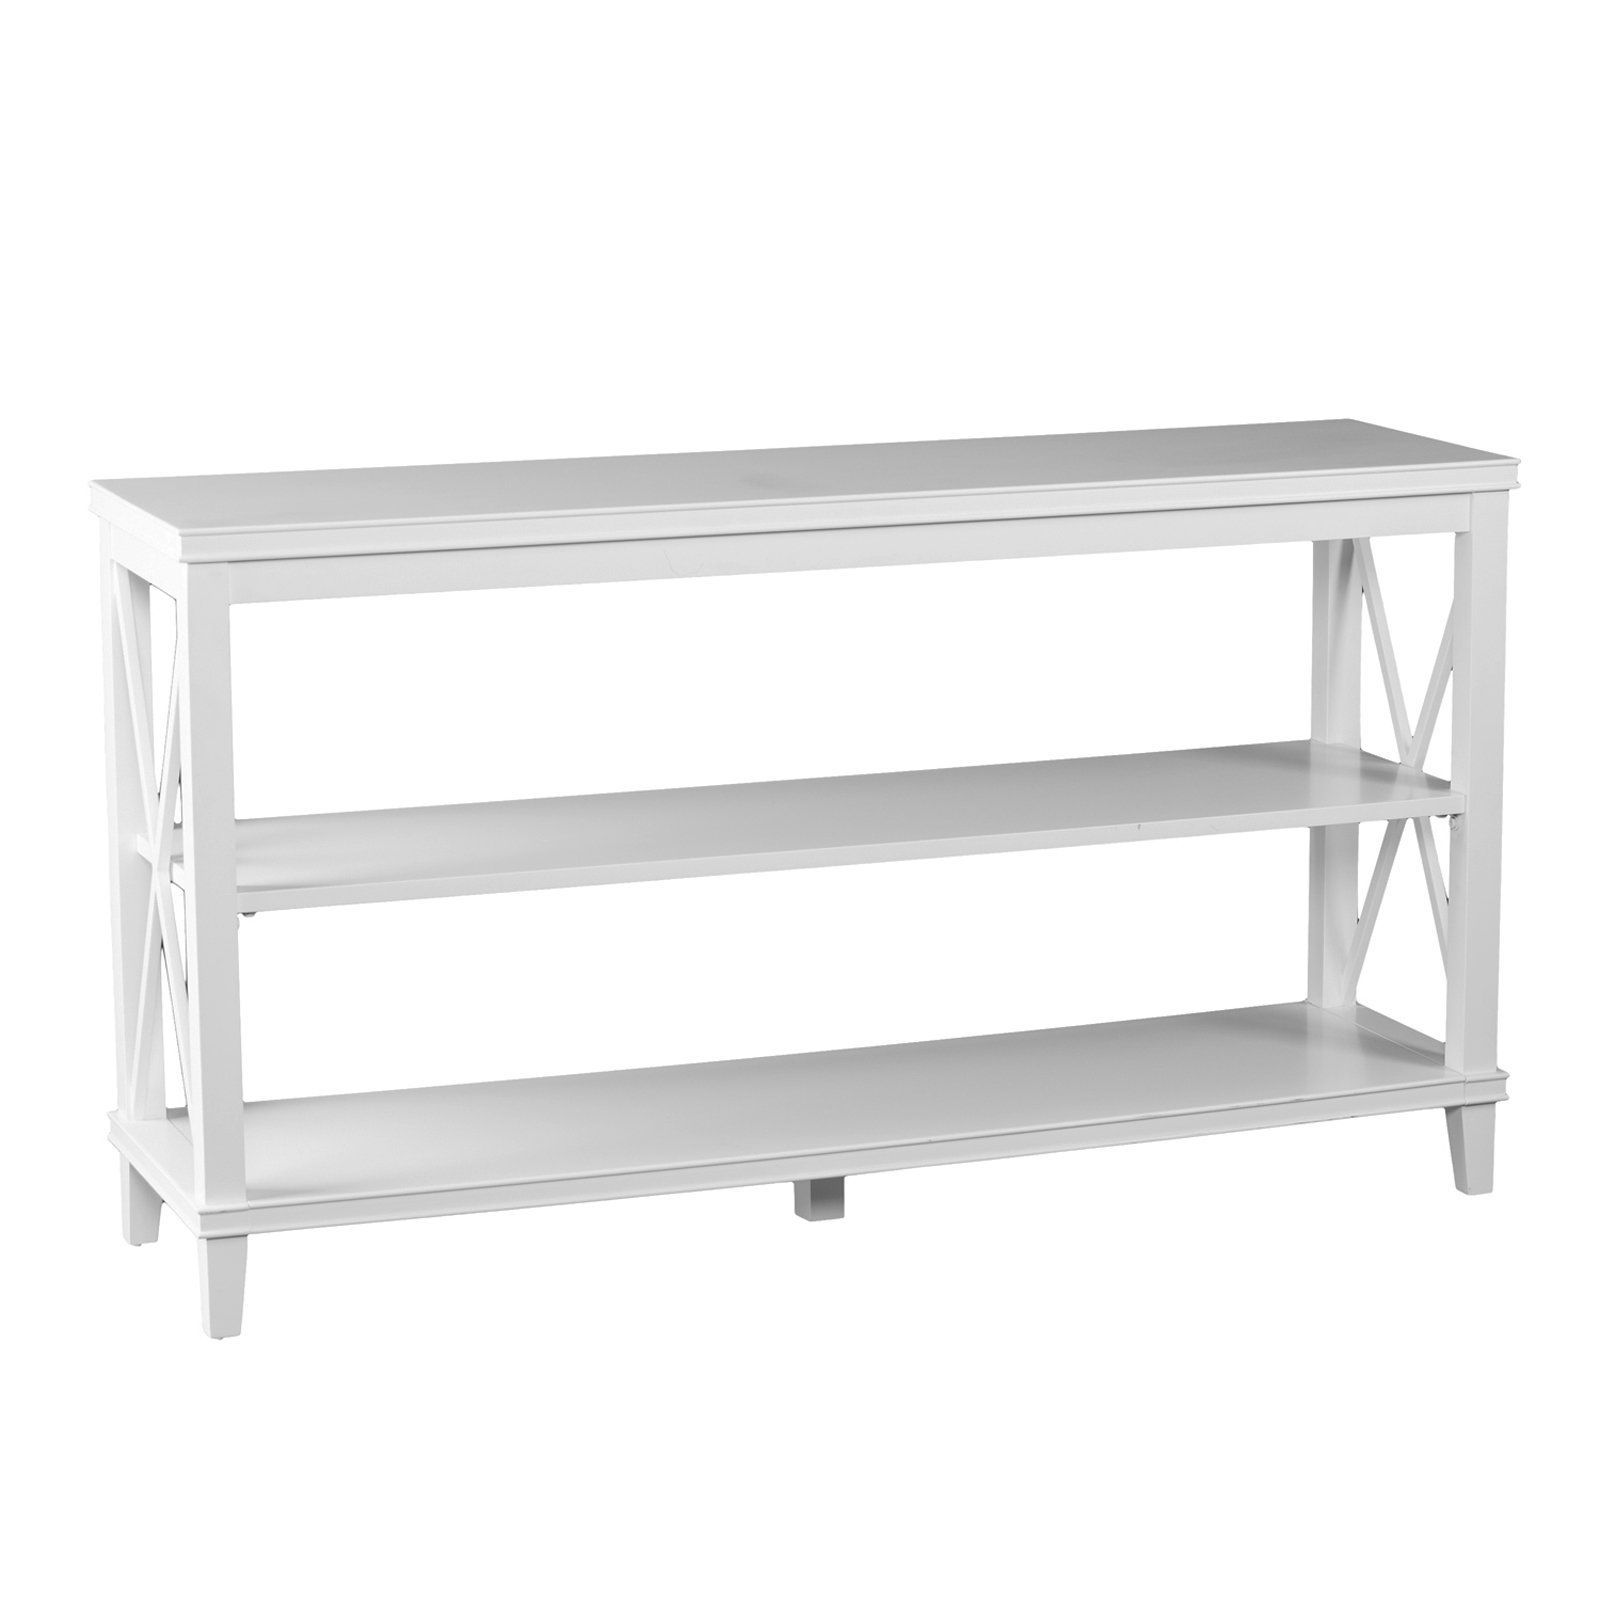 Southern Enterprises Larksmill Console Table In 2020 | Console Table Within Southern Enterprises Larksmill Coffee Tables (Gallery 2 of 20)